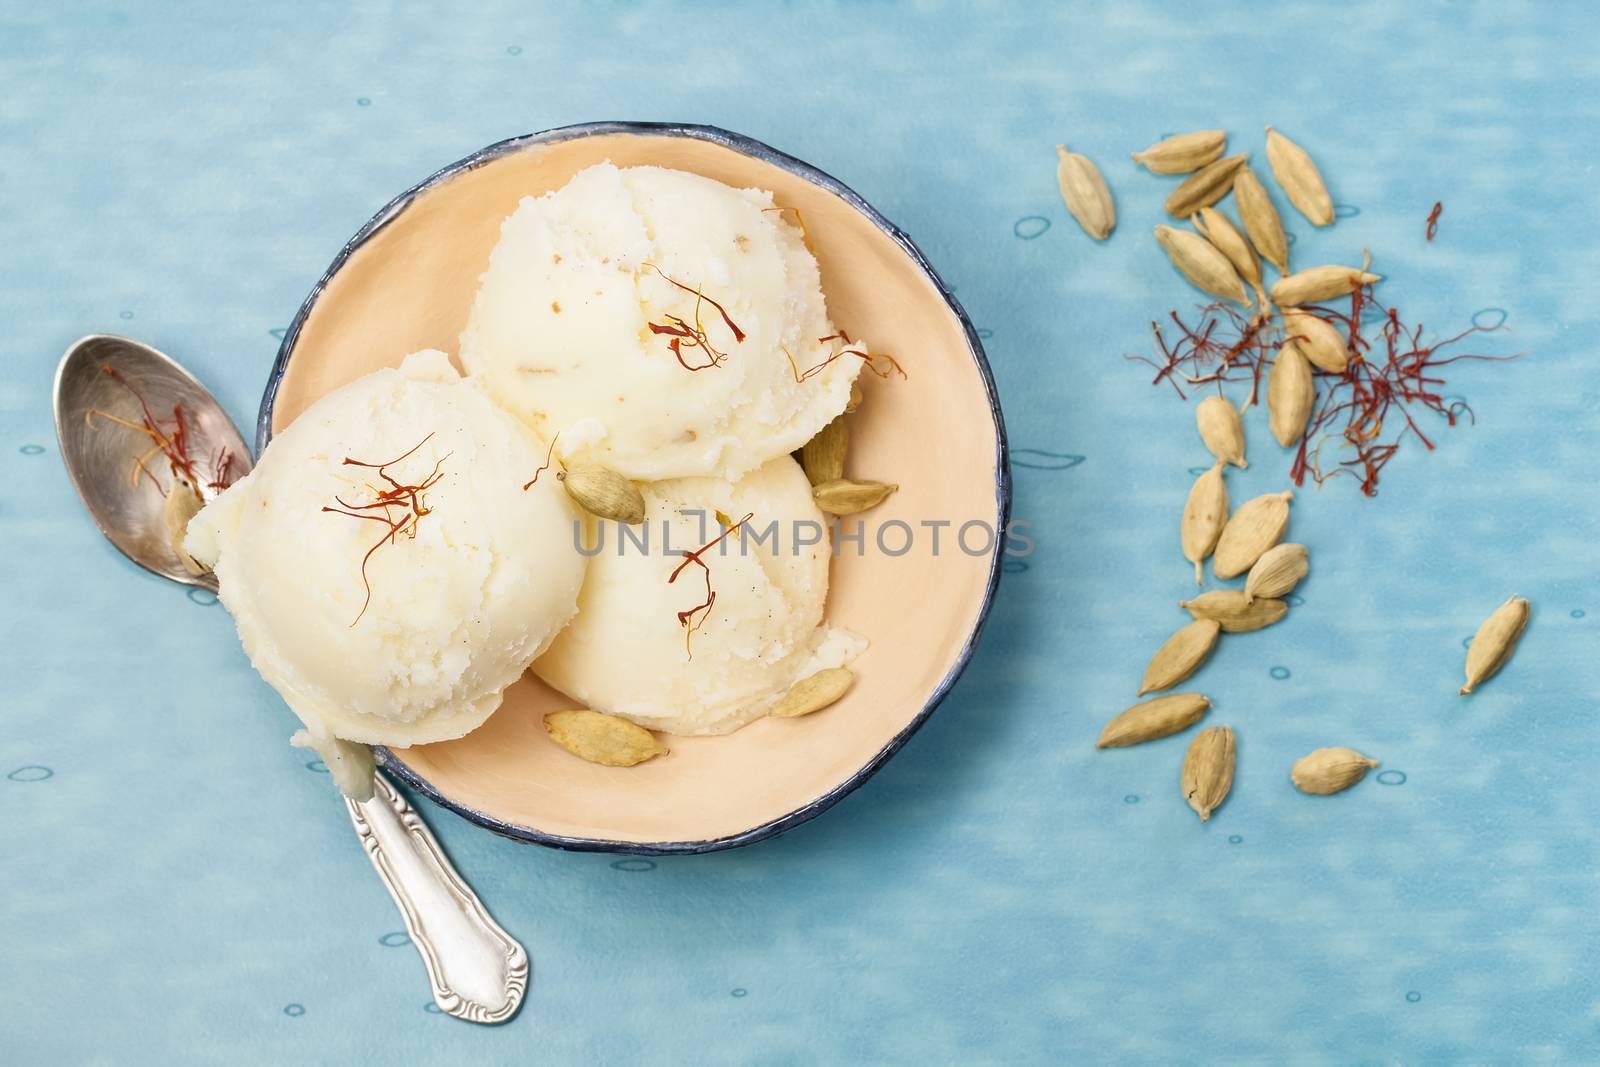 Saffron and Cardamom Ice Cream in small bowl over blue table. Macro photograph with shallow depth of field. Top view